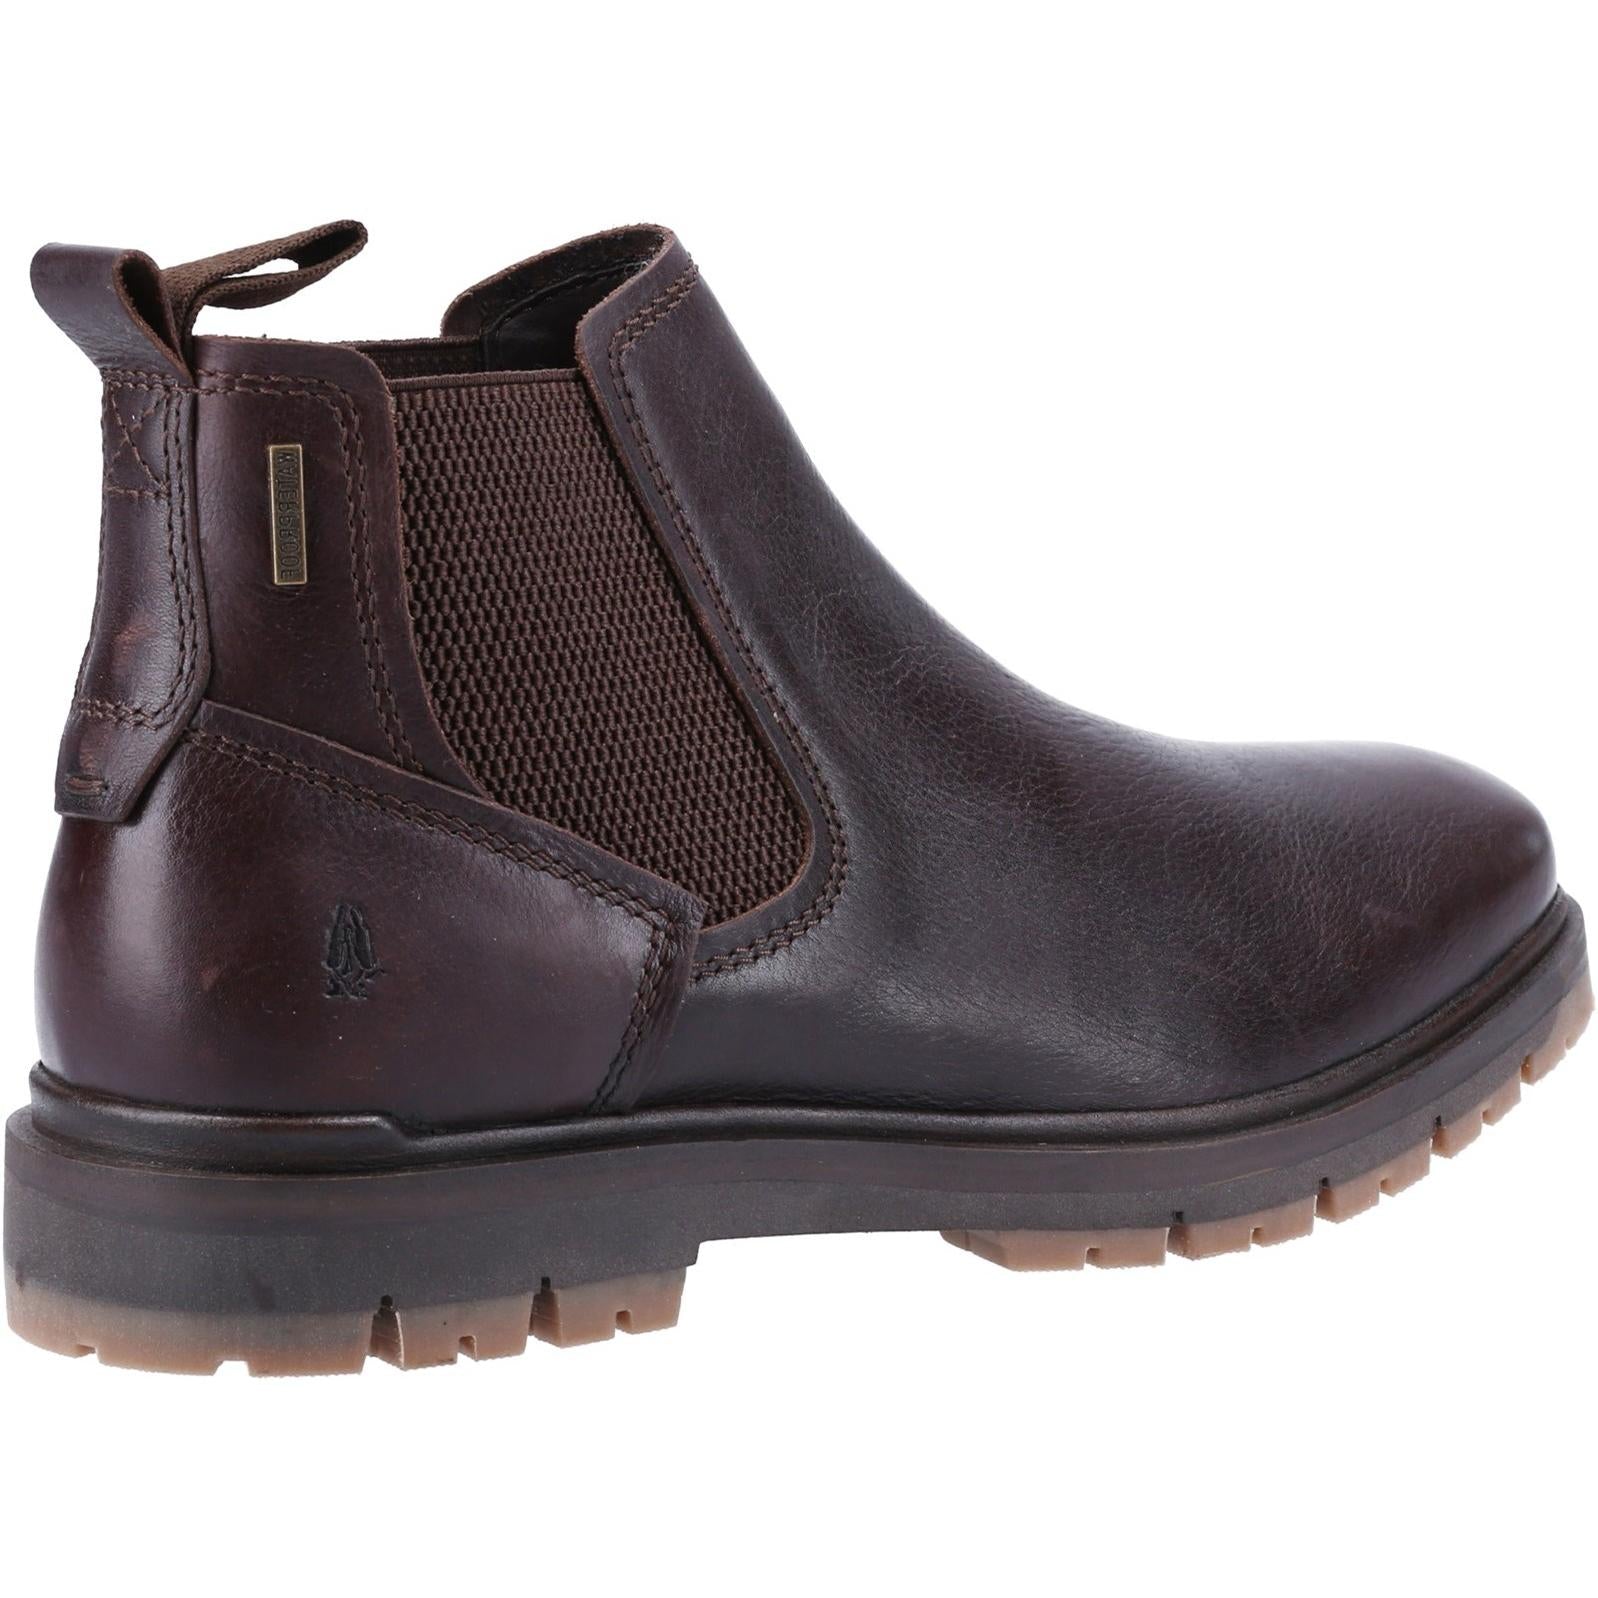 Hush Puppies Paxton Chelsea Boot